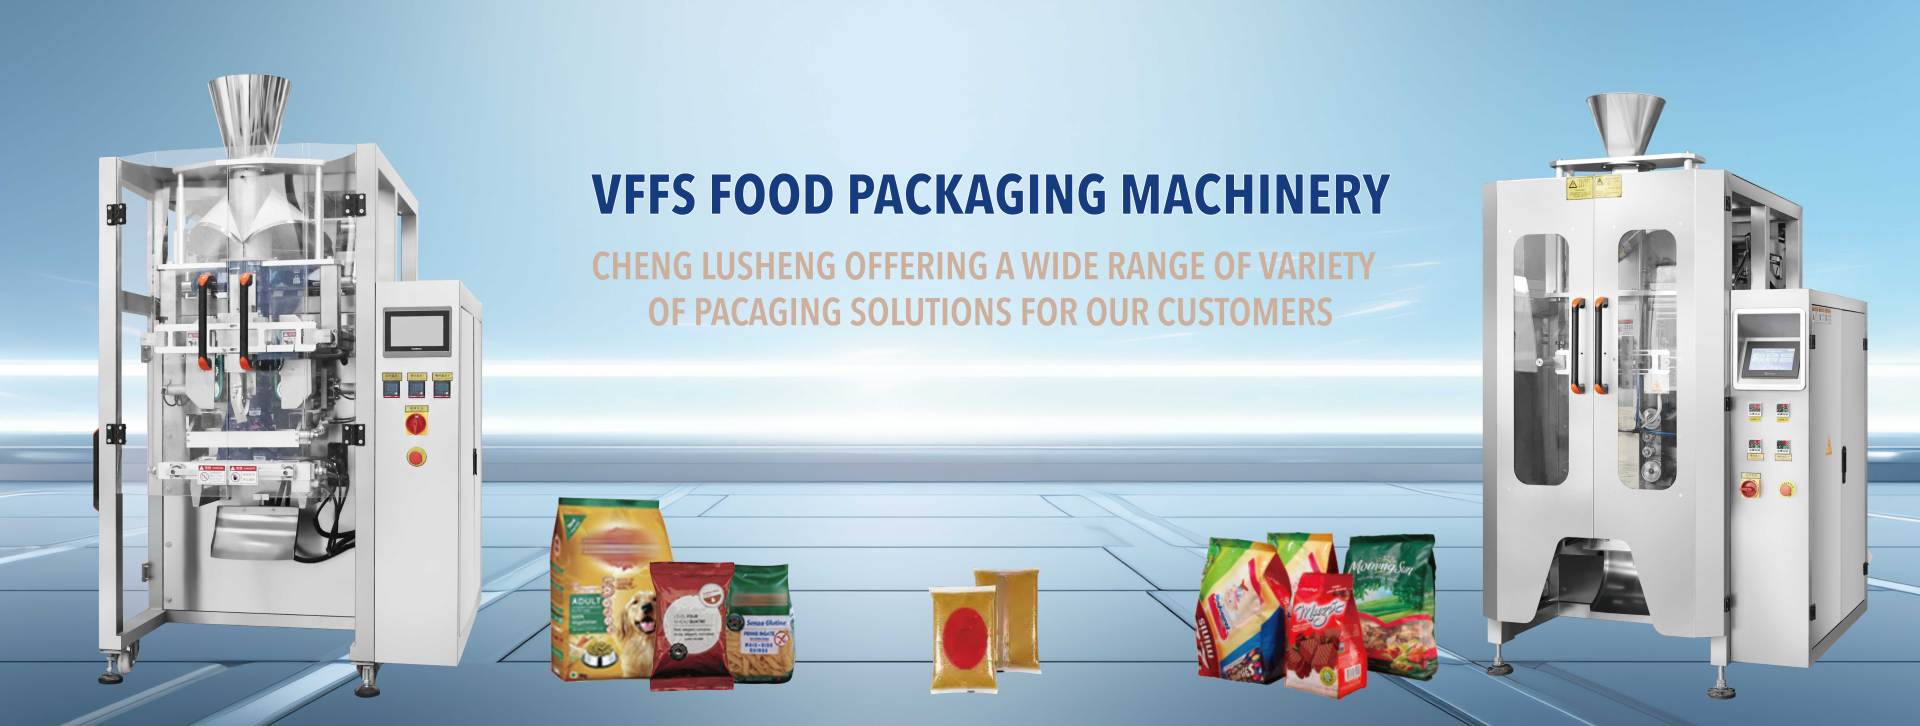 VFFS Food Packaging Machinery